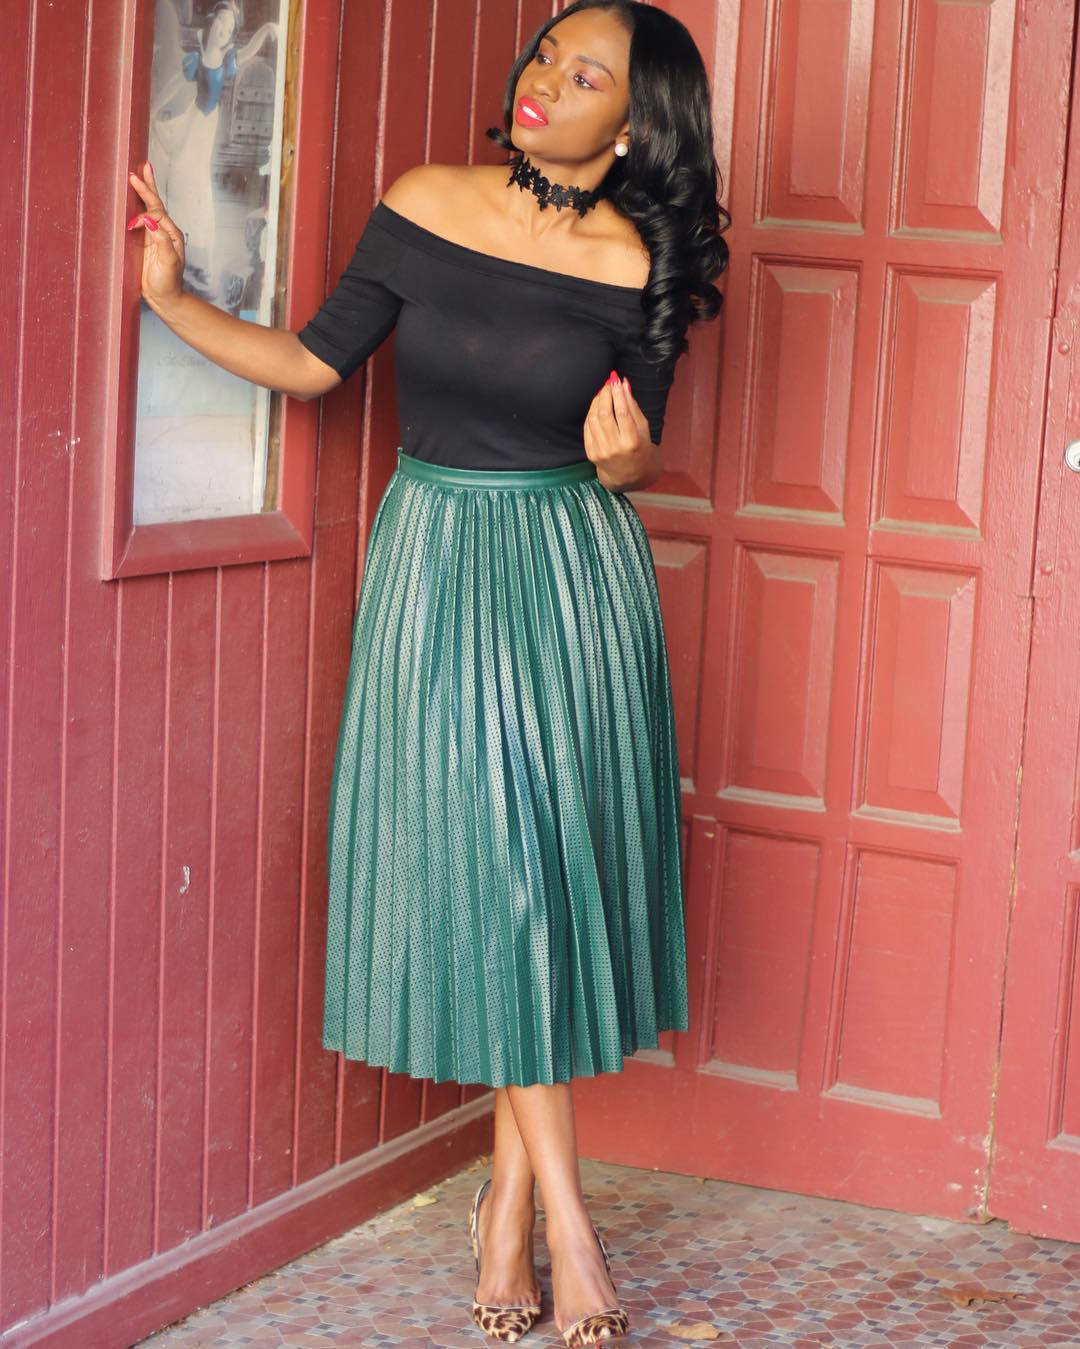 Choosing The Perfect Skirt For Your Height - FOLAPFASHION